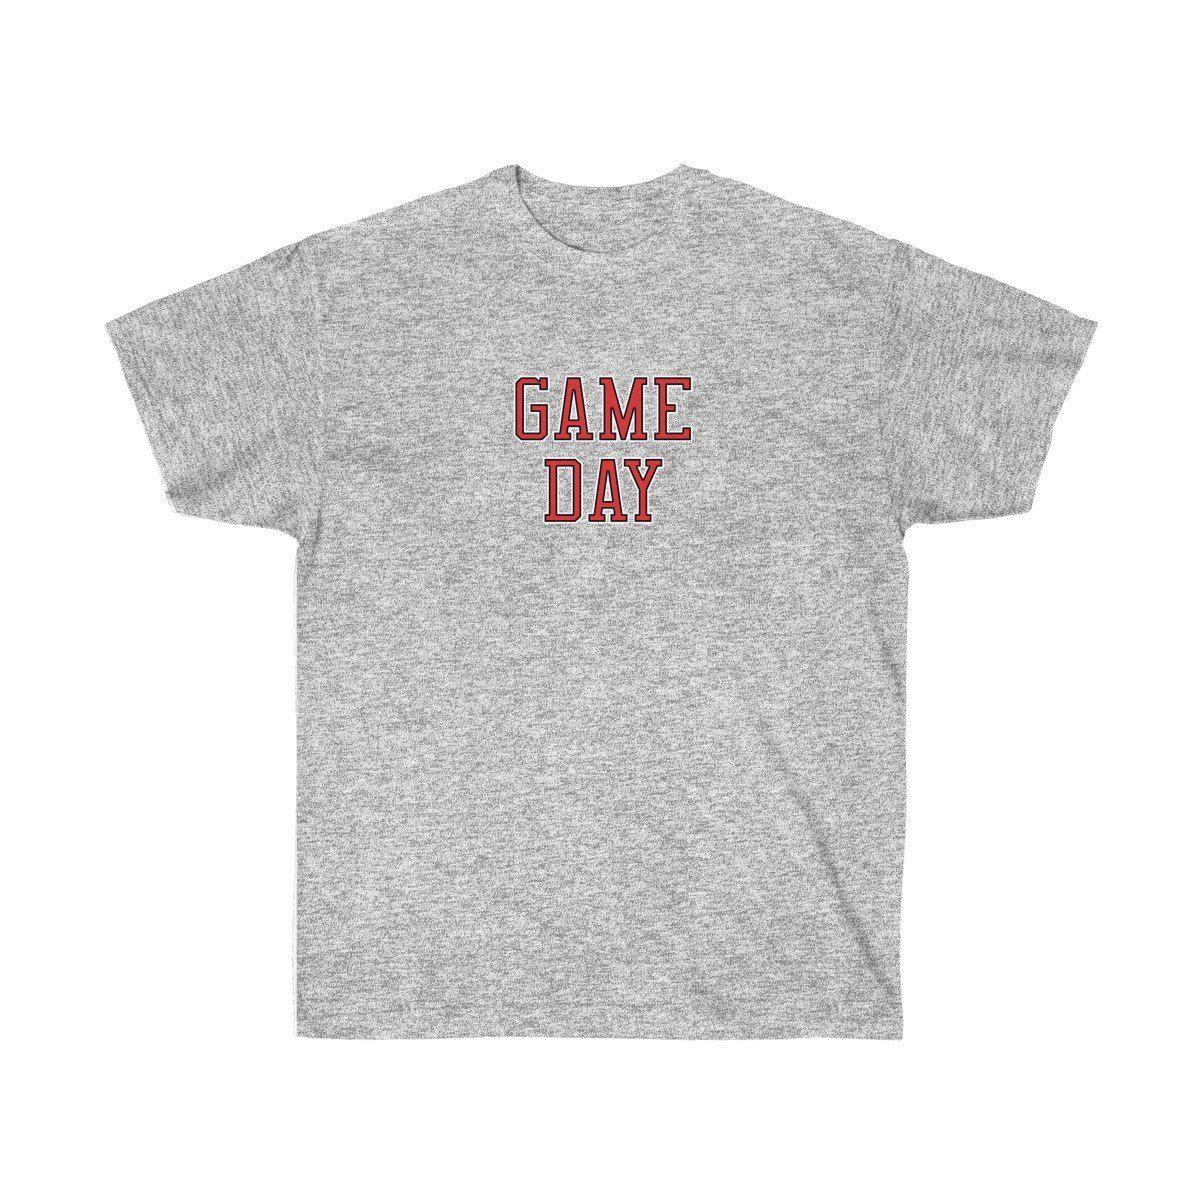 Game Day Tee - Sports T-shirt for Football, Basket, Soccer games-Sport Grey-S-Archethype